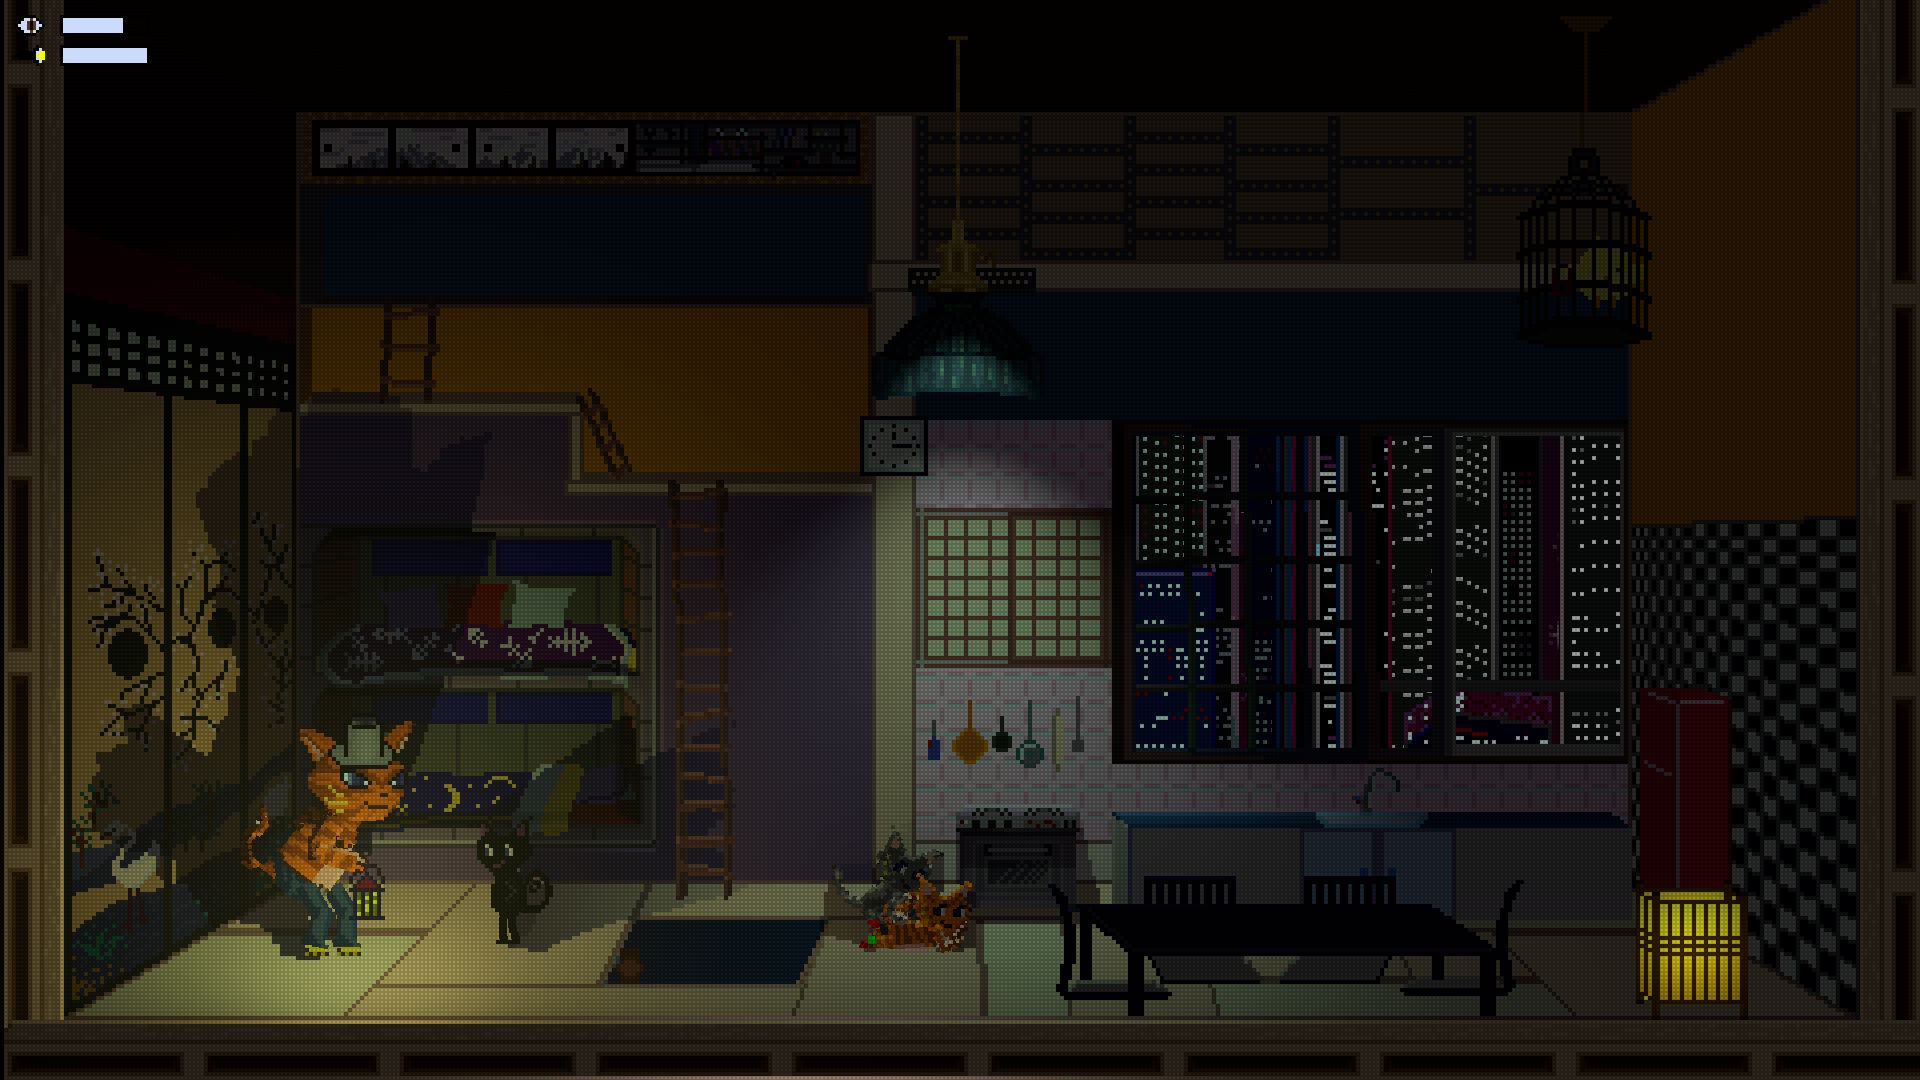 Kiyo holding up the lantern in a cute room - who lives there?